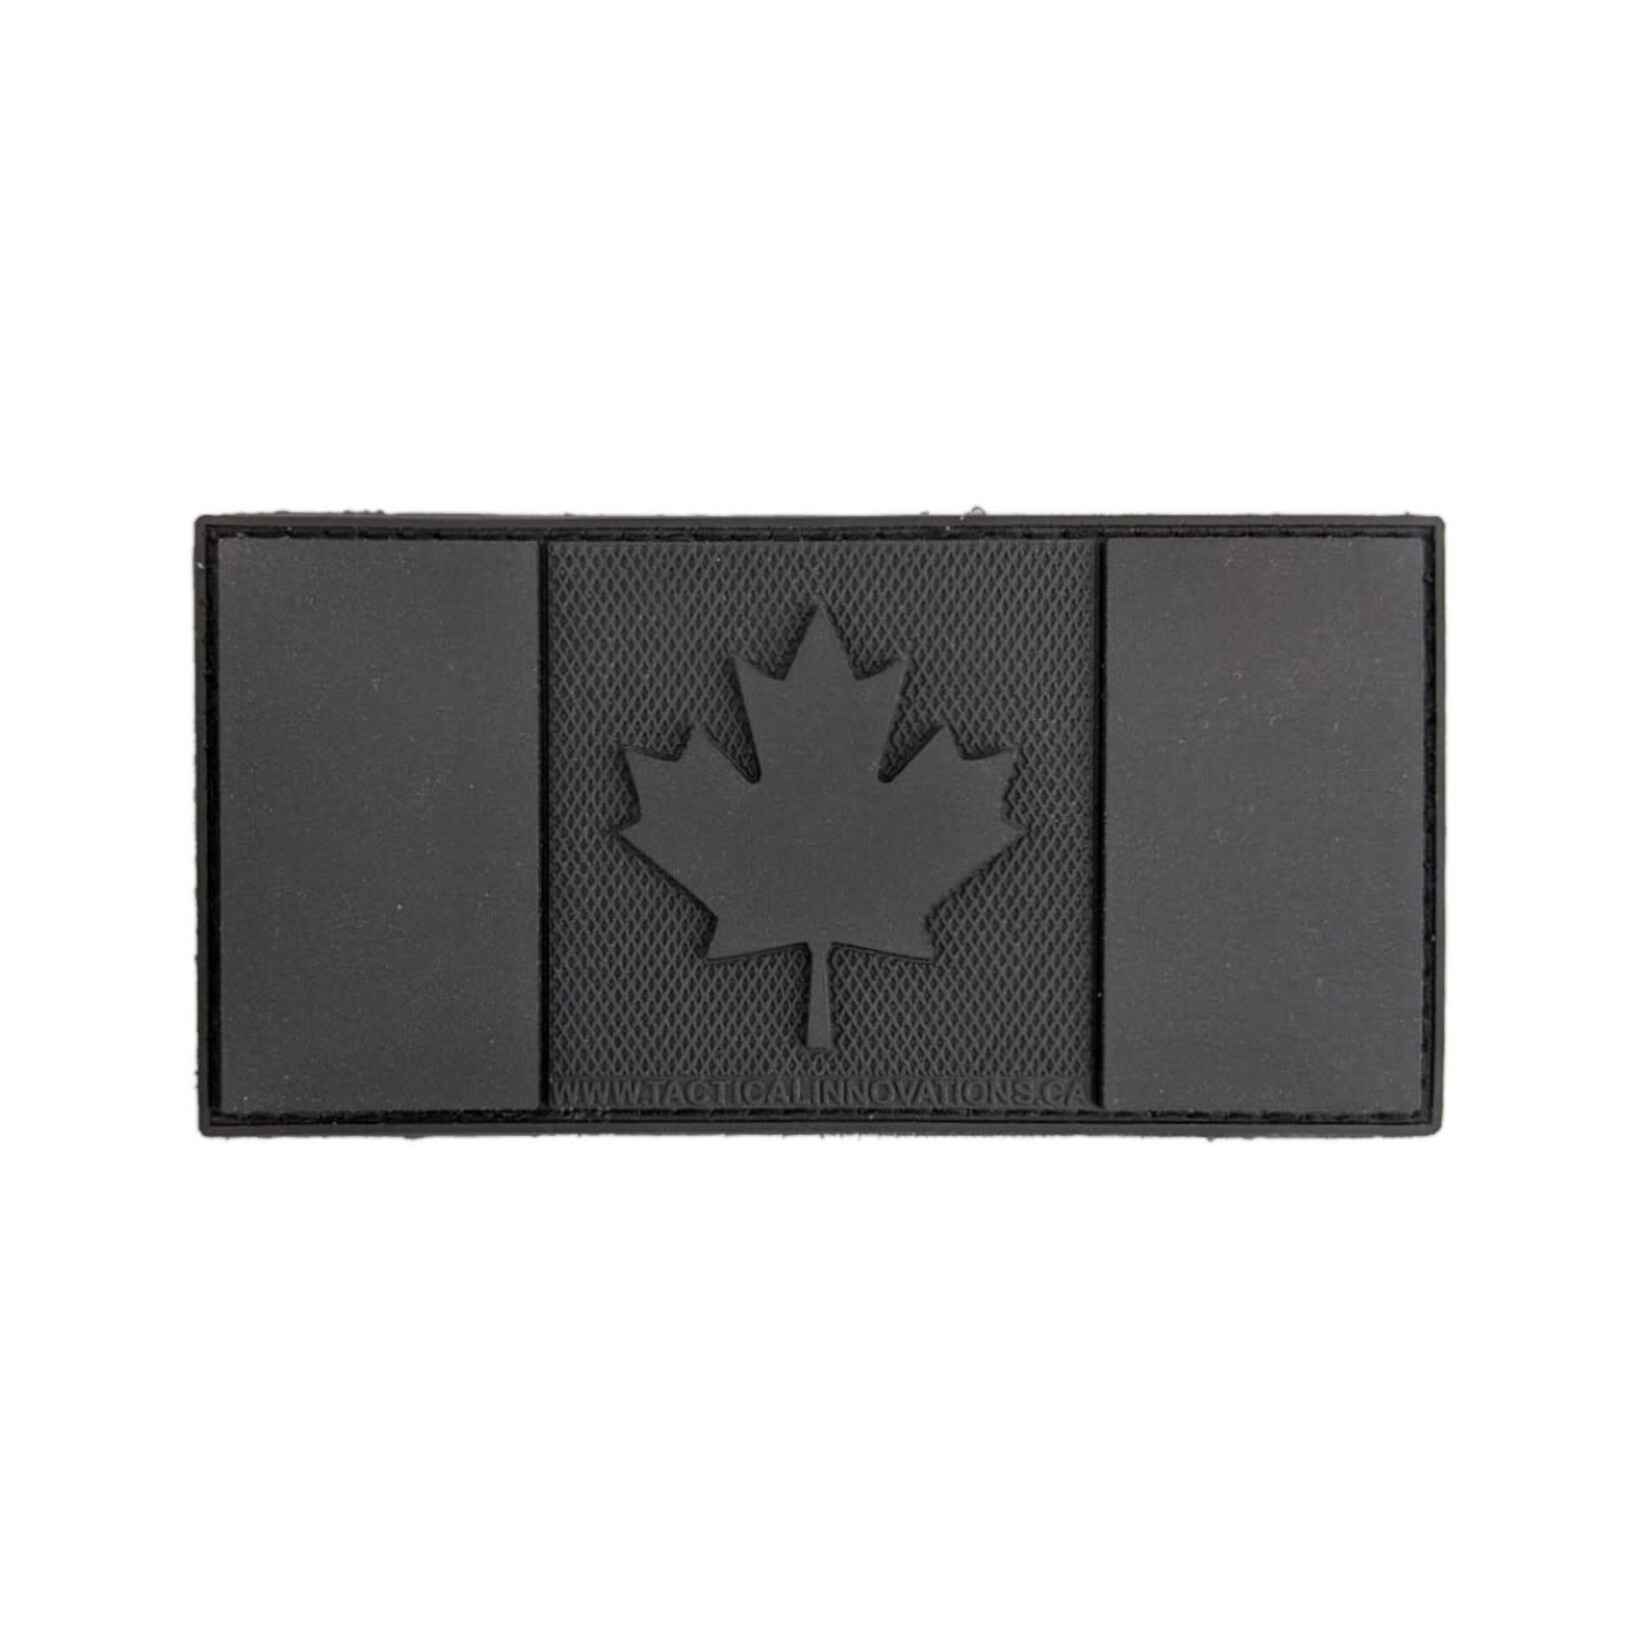 tactical innovations PVC Morale Patch - Canadian Flag -BlackOps 2"x4"